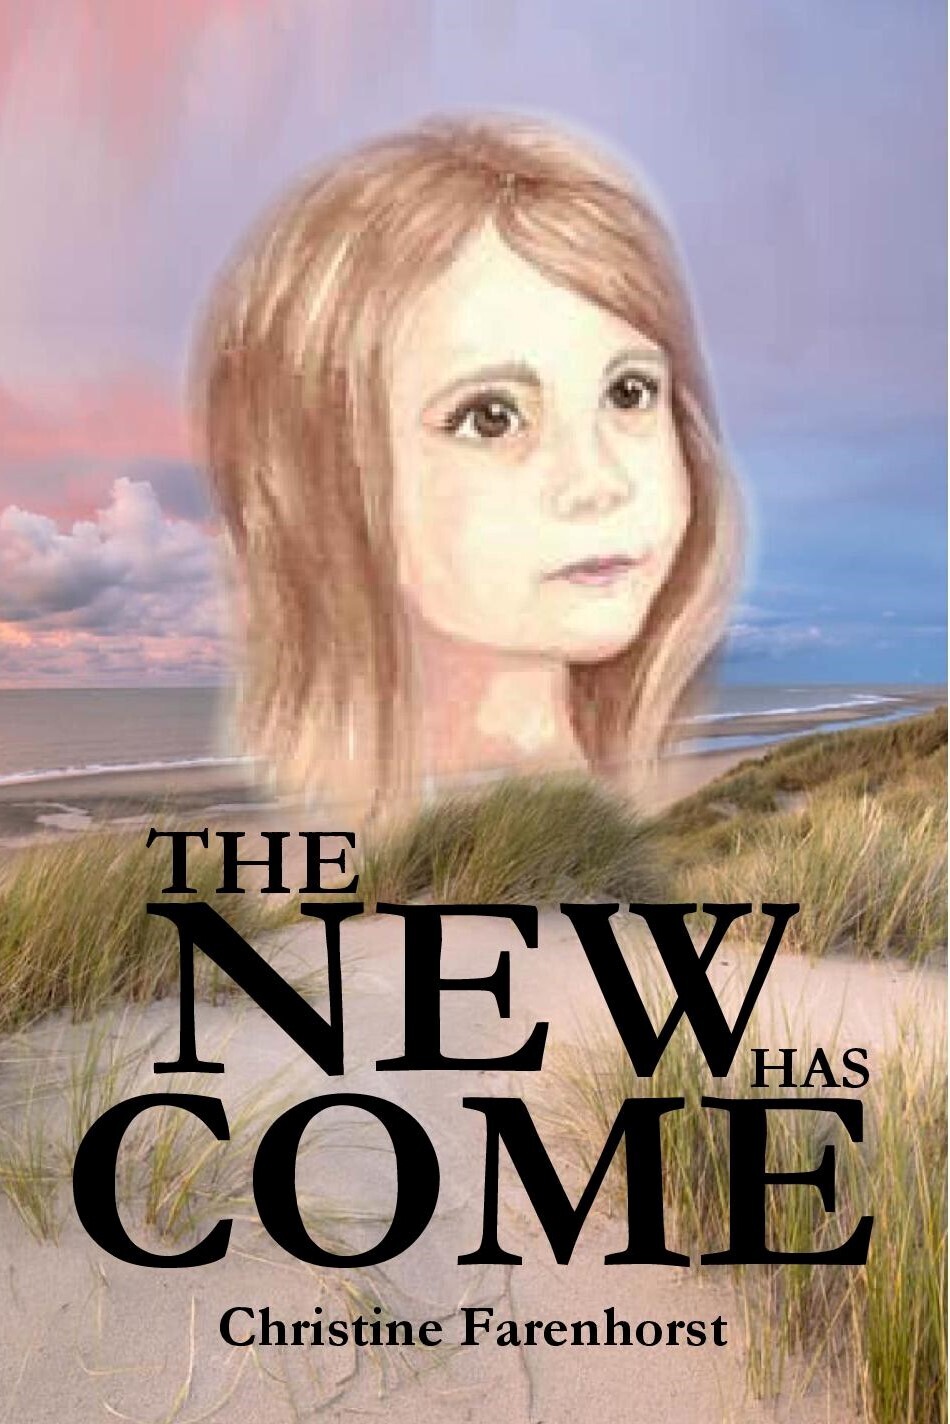 The New Has Come by Christine Farenhorst